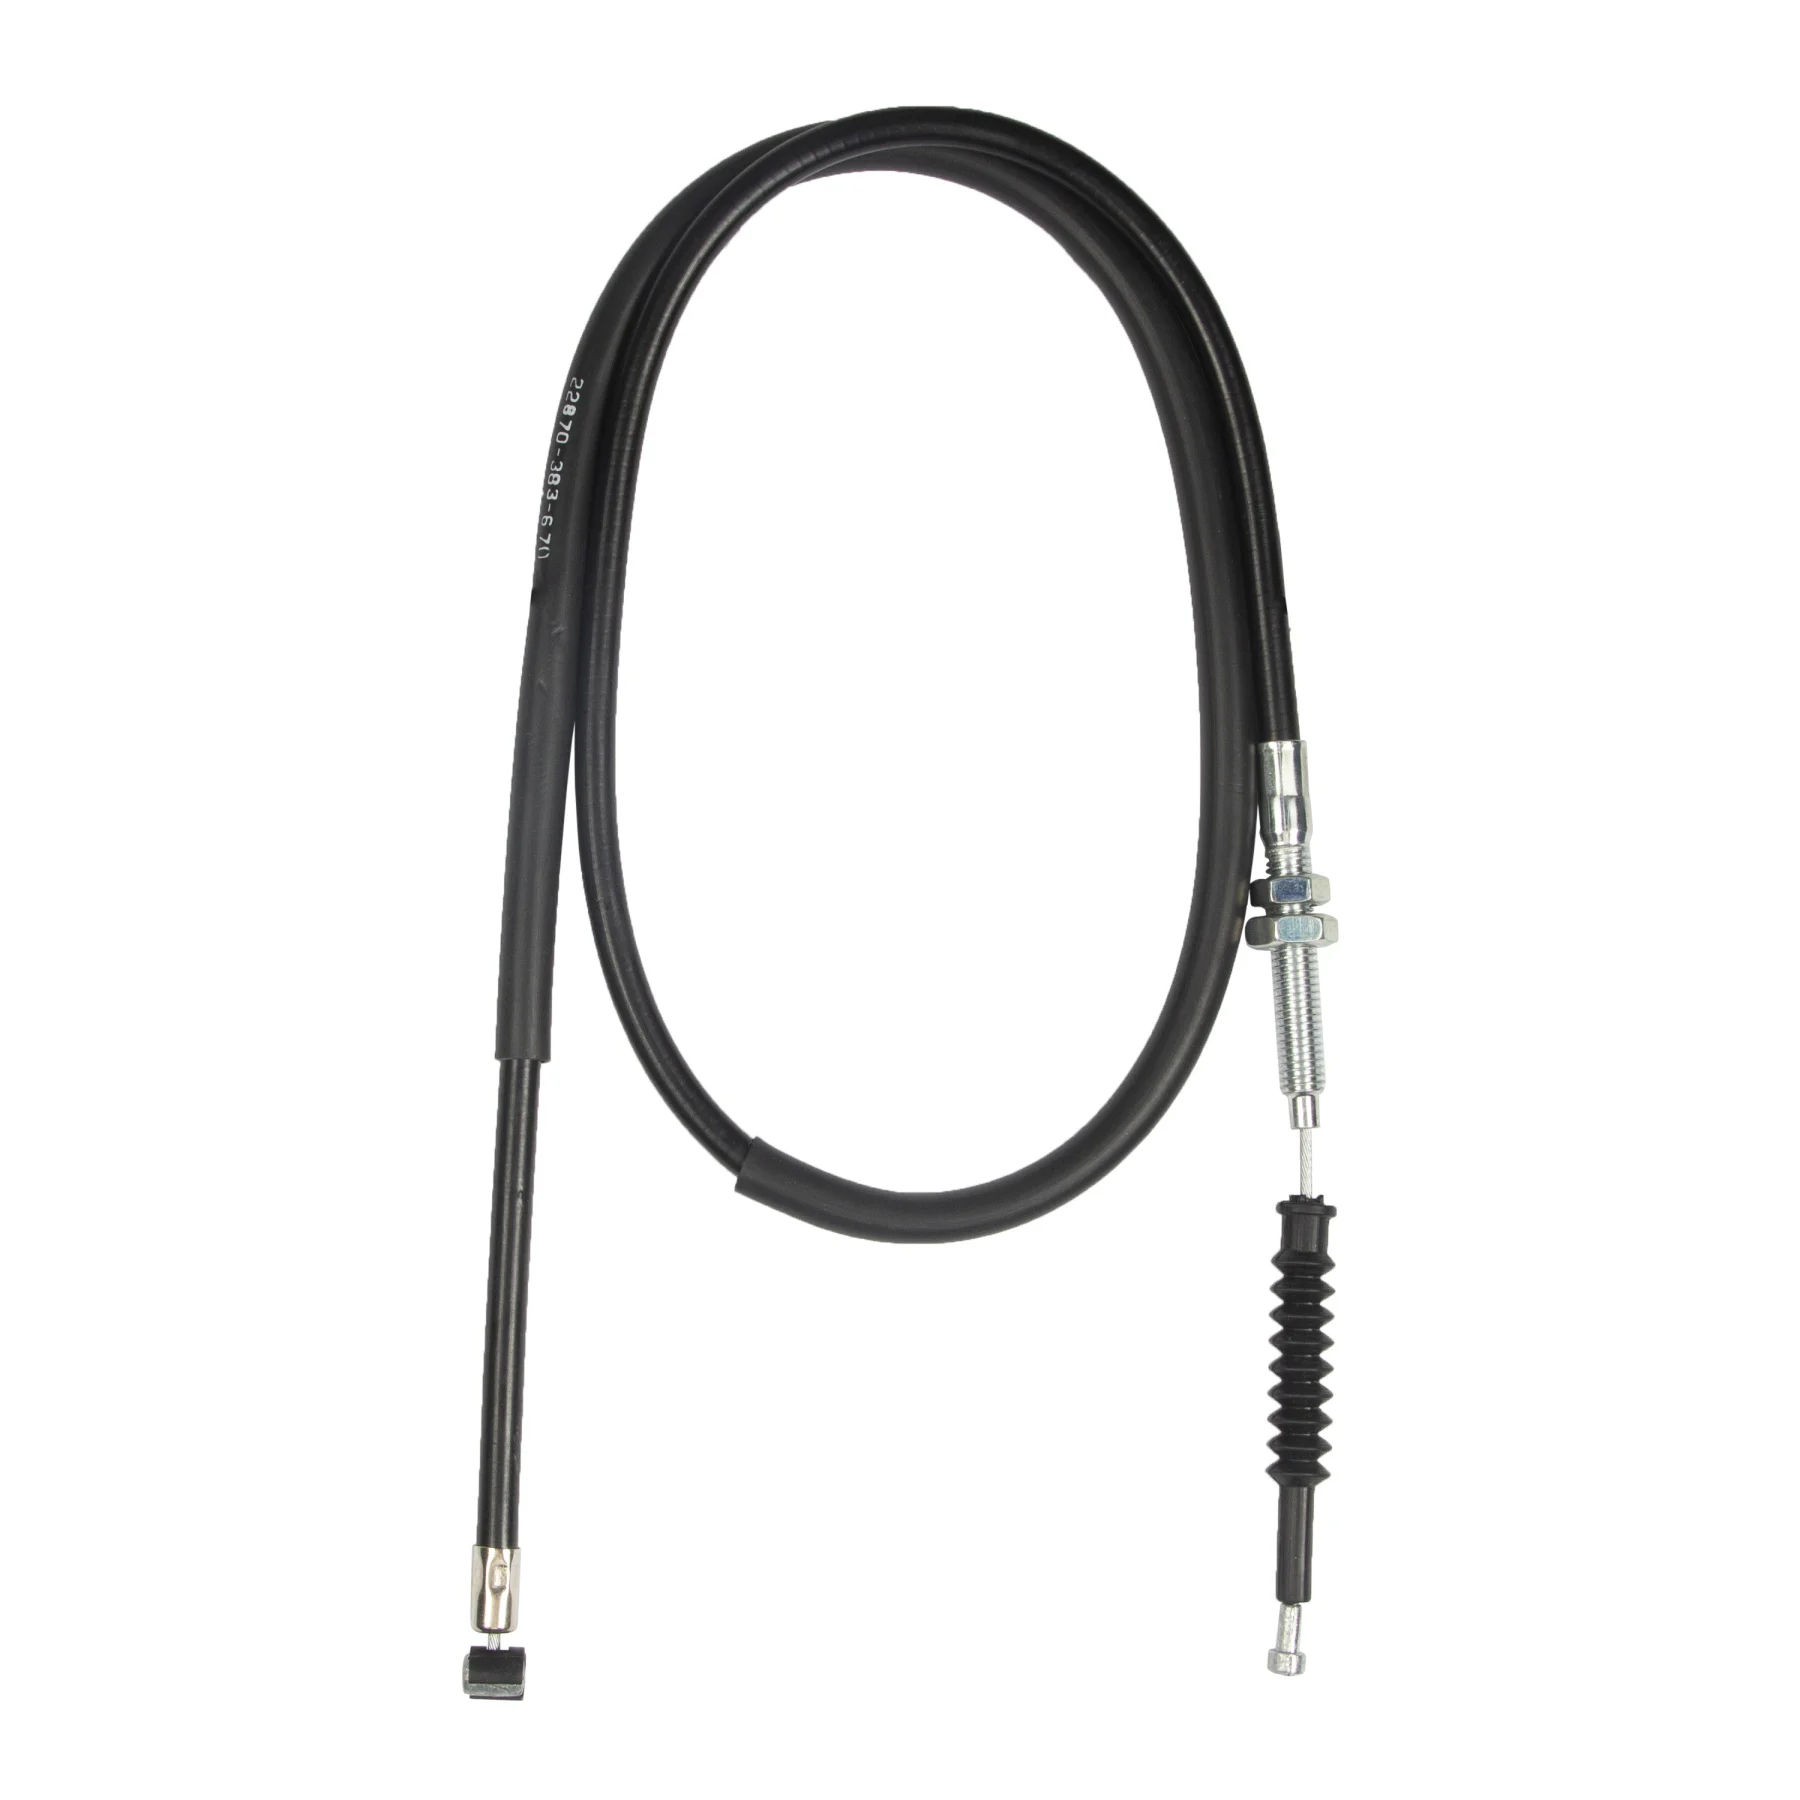 

MotoMaster 22870-383-670 Clutch Cables for Honda CB 125 S (1976-1980)